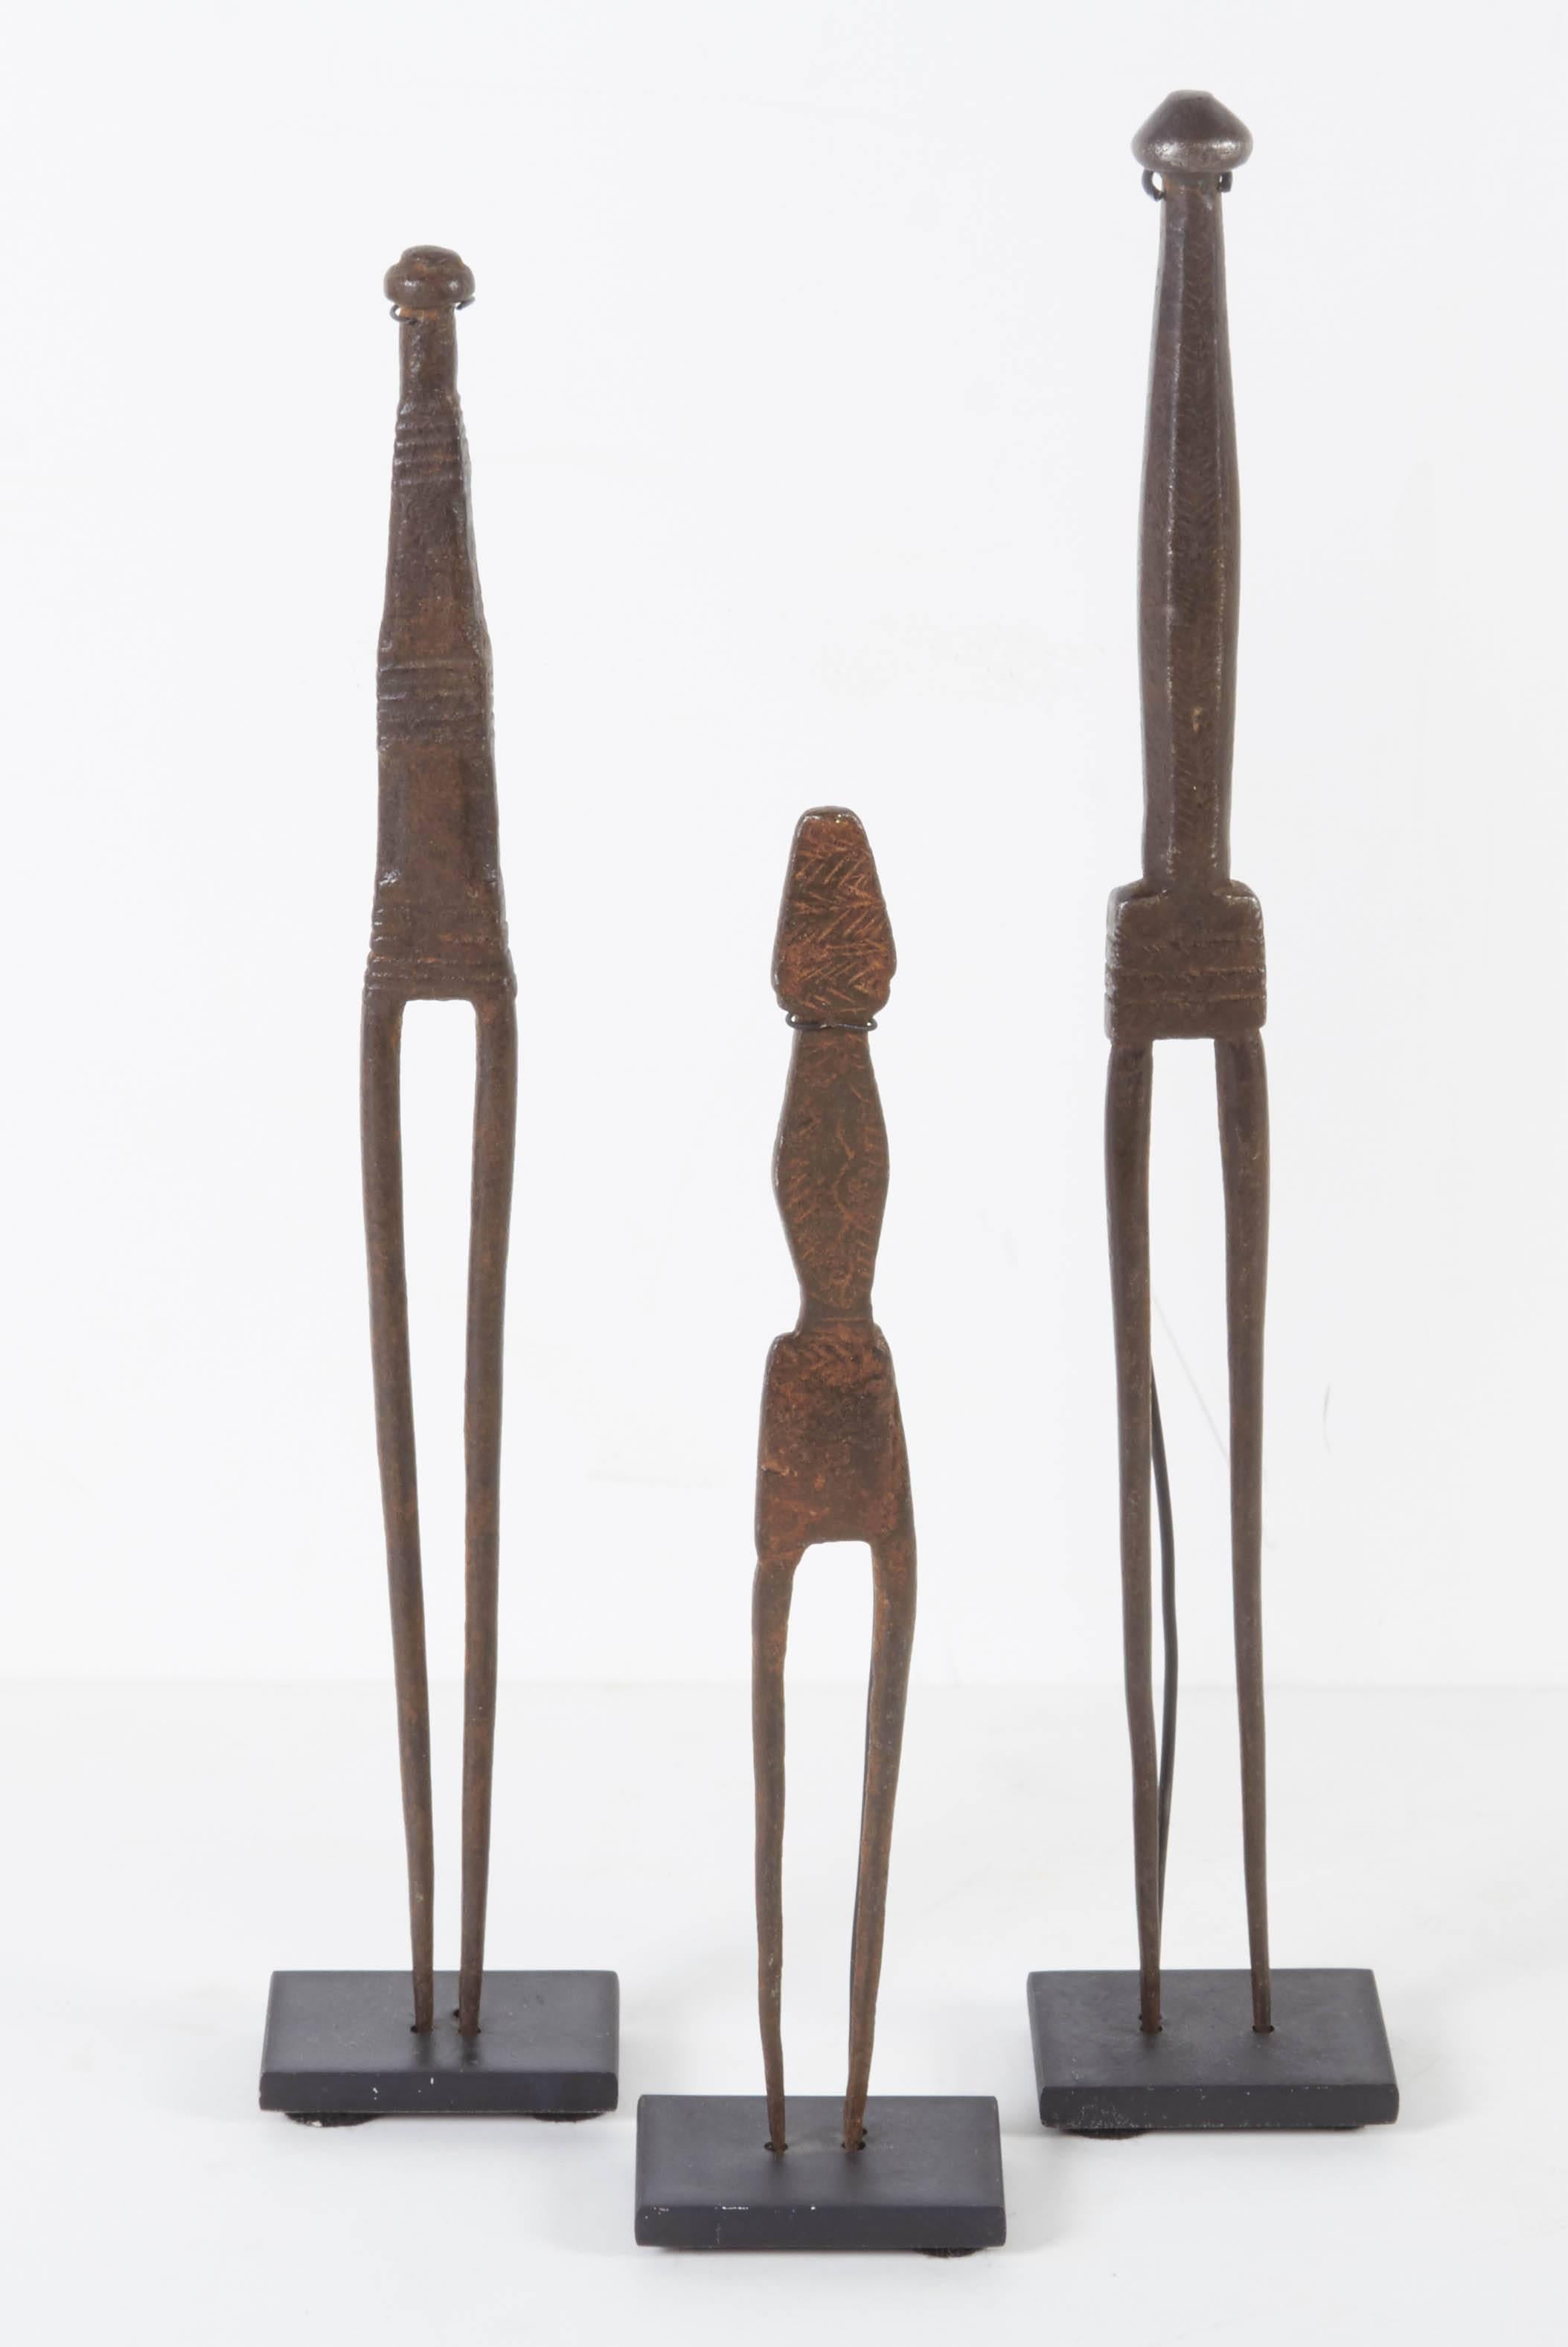 A set of three carefully hand-forged antique hair picks on custom stands. These uncannily anthropomorphic objects are from Nagaland in the North of India. This set of antique objects could be easily mistaken for contemporary sculpture.
M933.